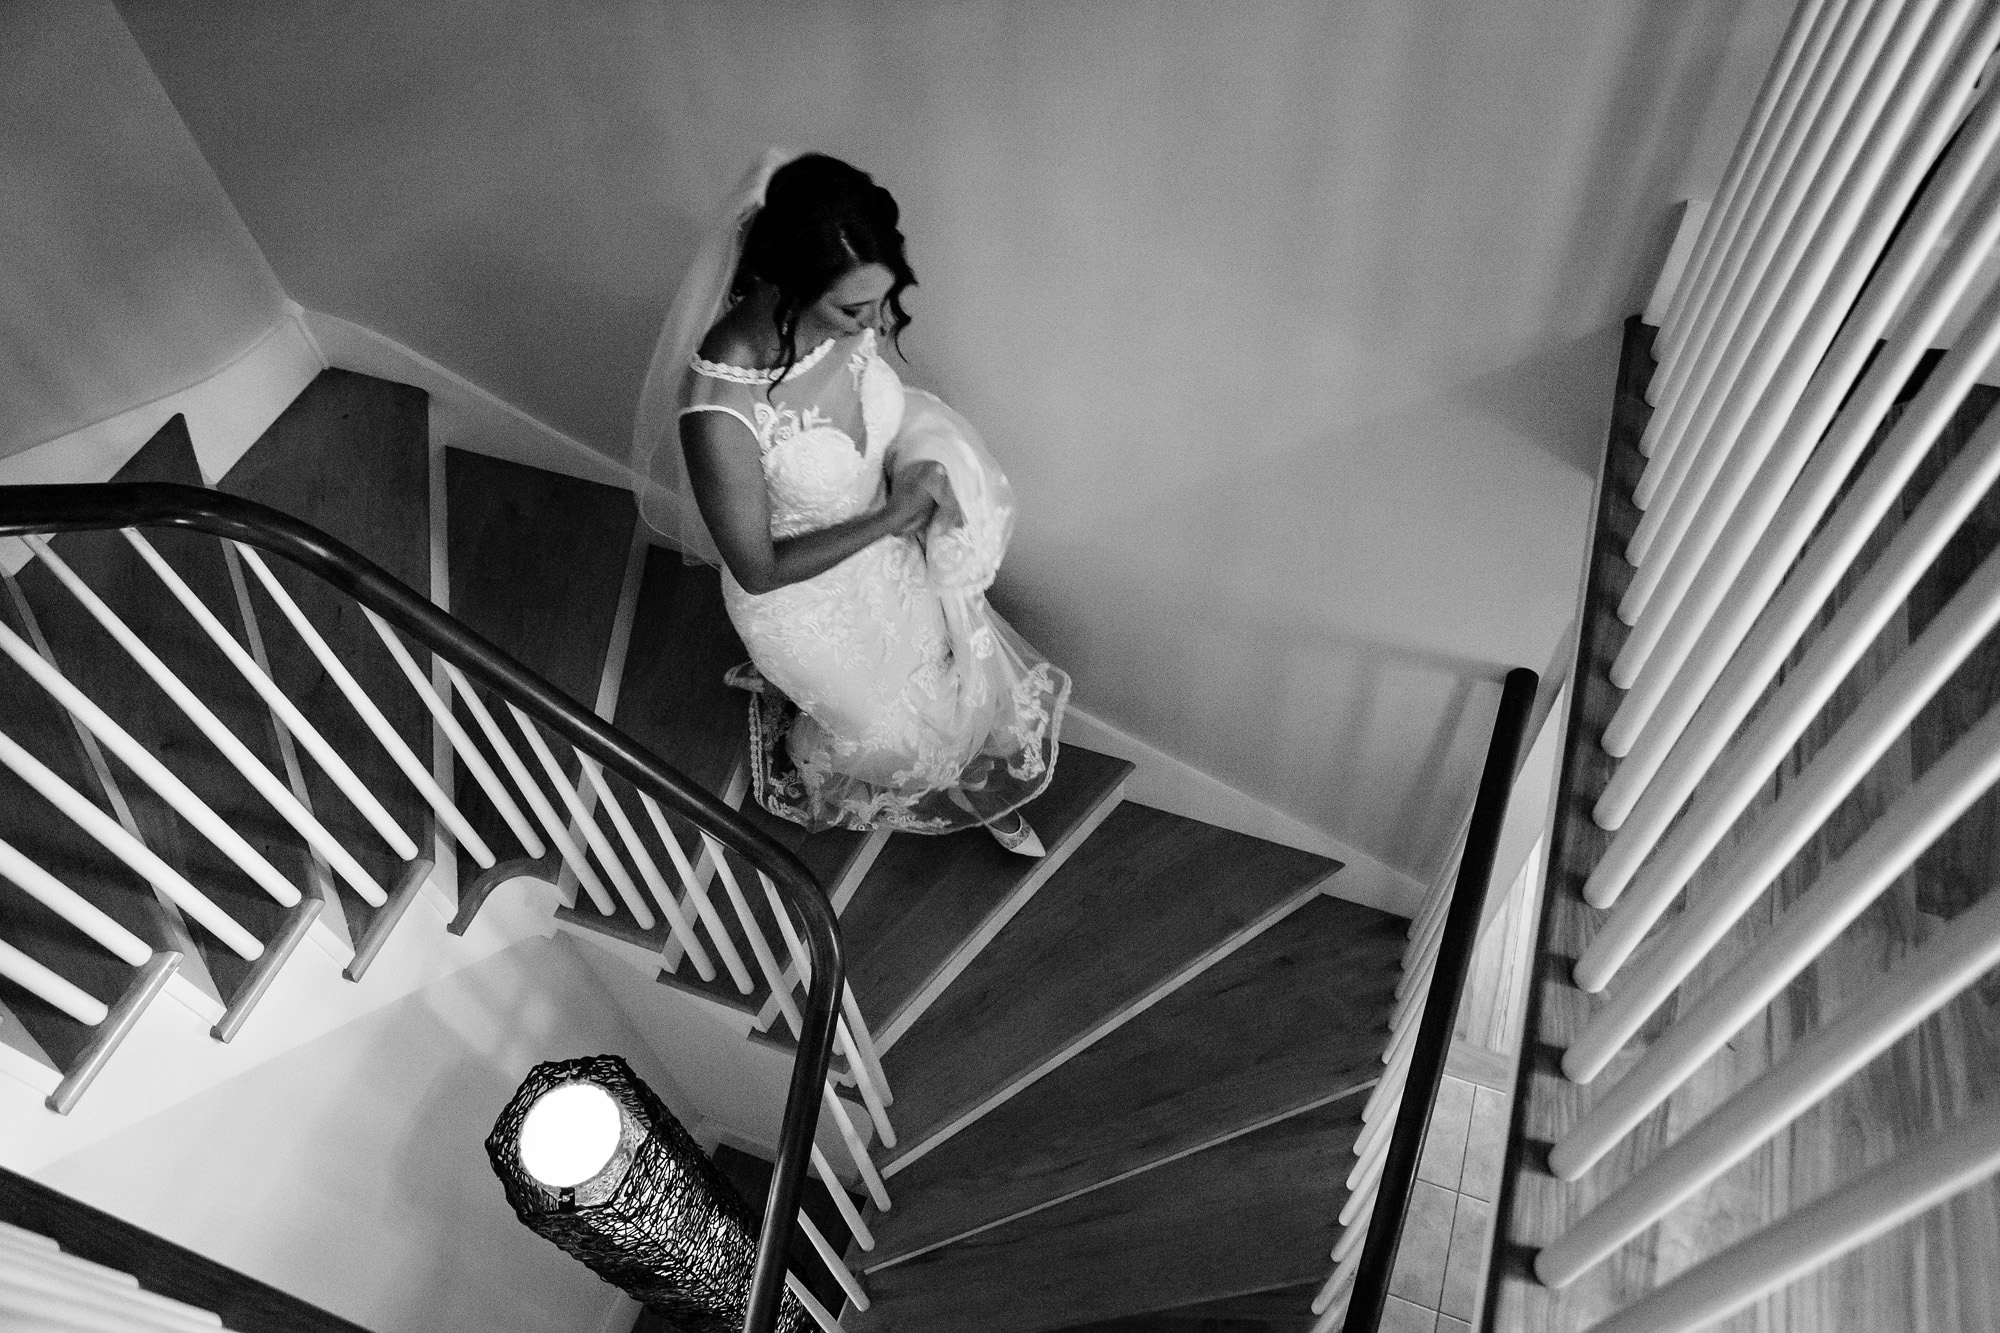 The bride walks down the stairs toward her wedding ceremony in Manchester Maine